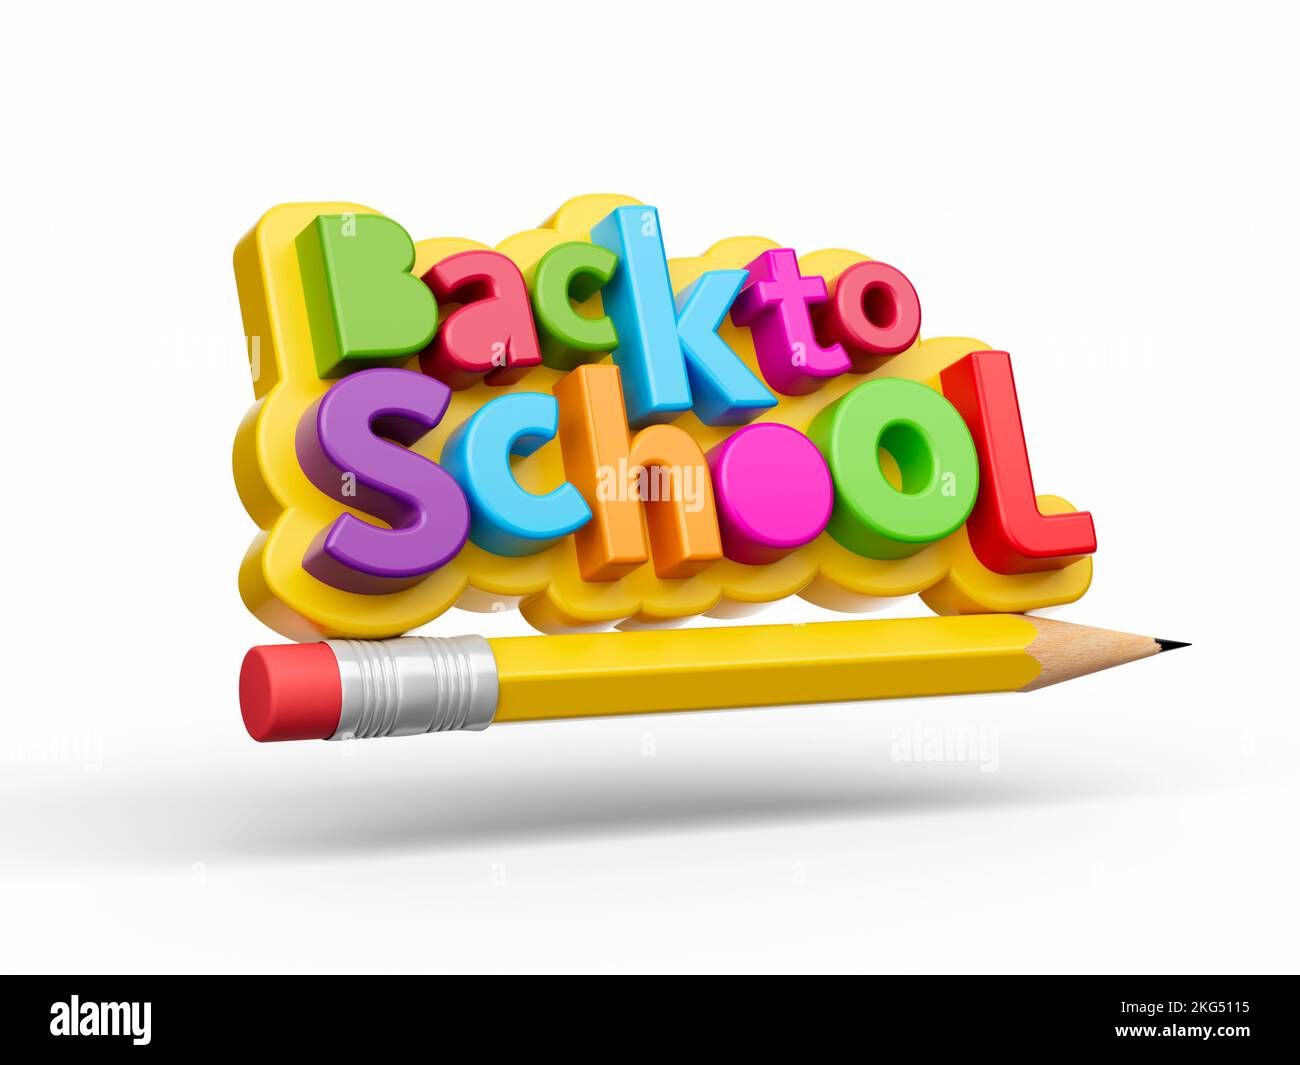 A 3D rendering of a 'Back to school' banner on a pencil floating in a white empty space Stock Photo